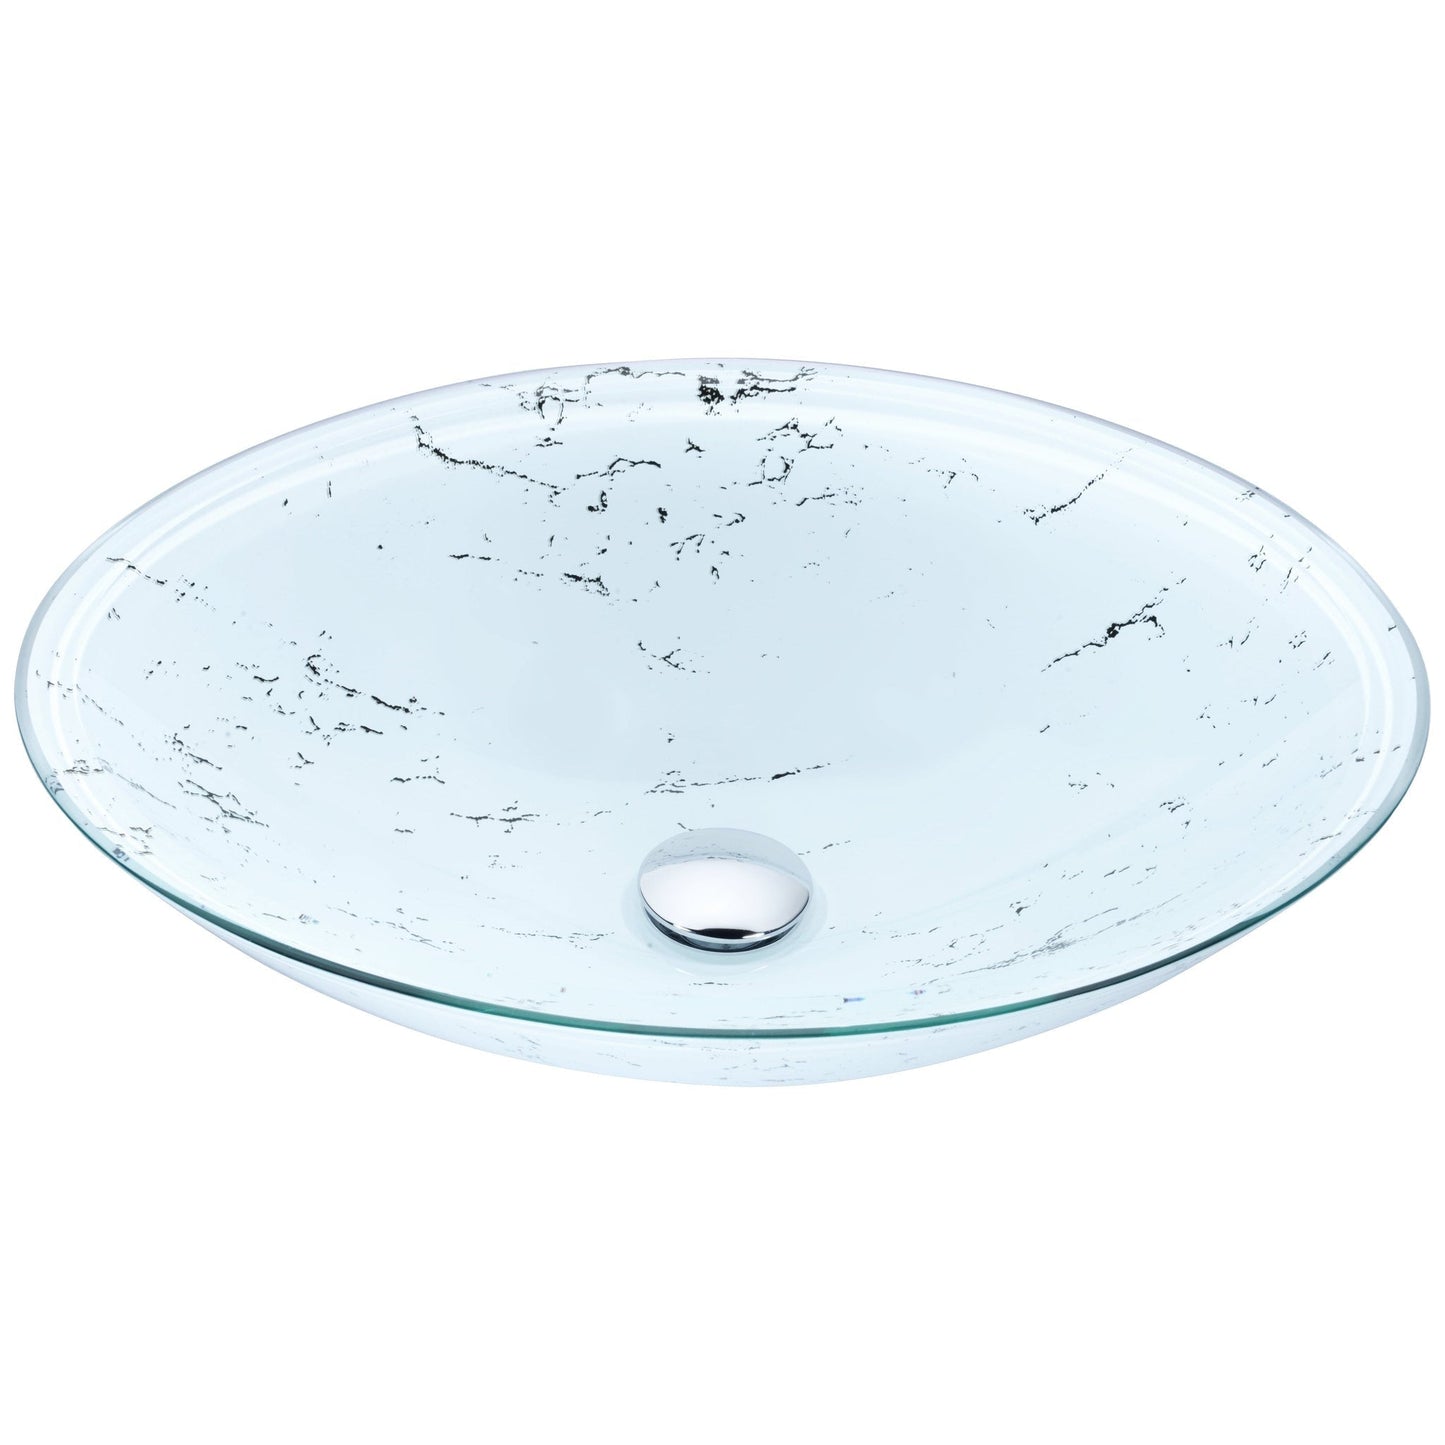 ANZZI Lepea Series 20" x 15" Oval Shape Marbled White Vessel Sink With Polished Chrome Pop-Up Drain